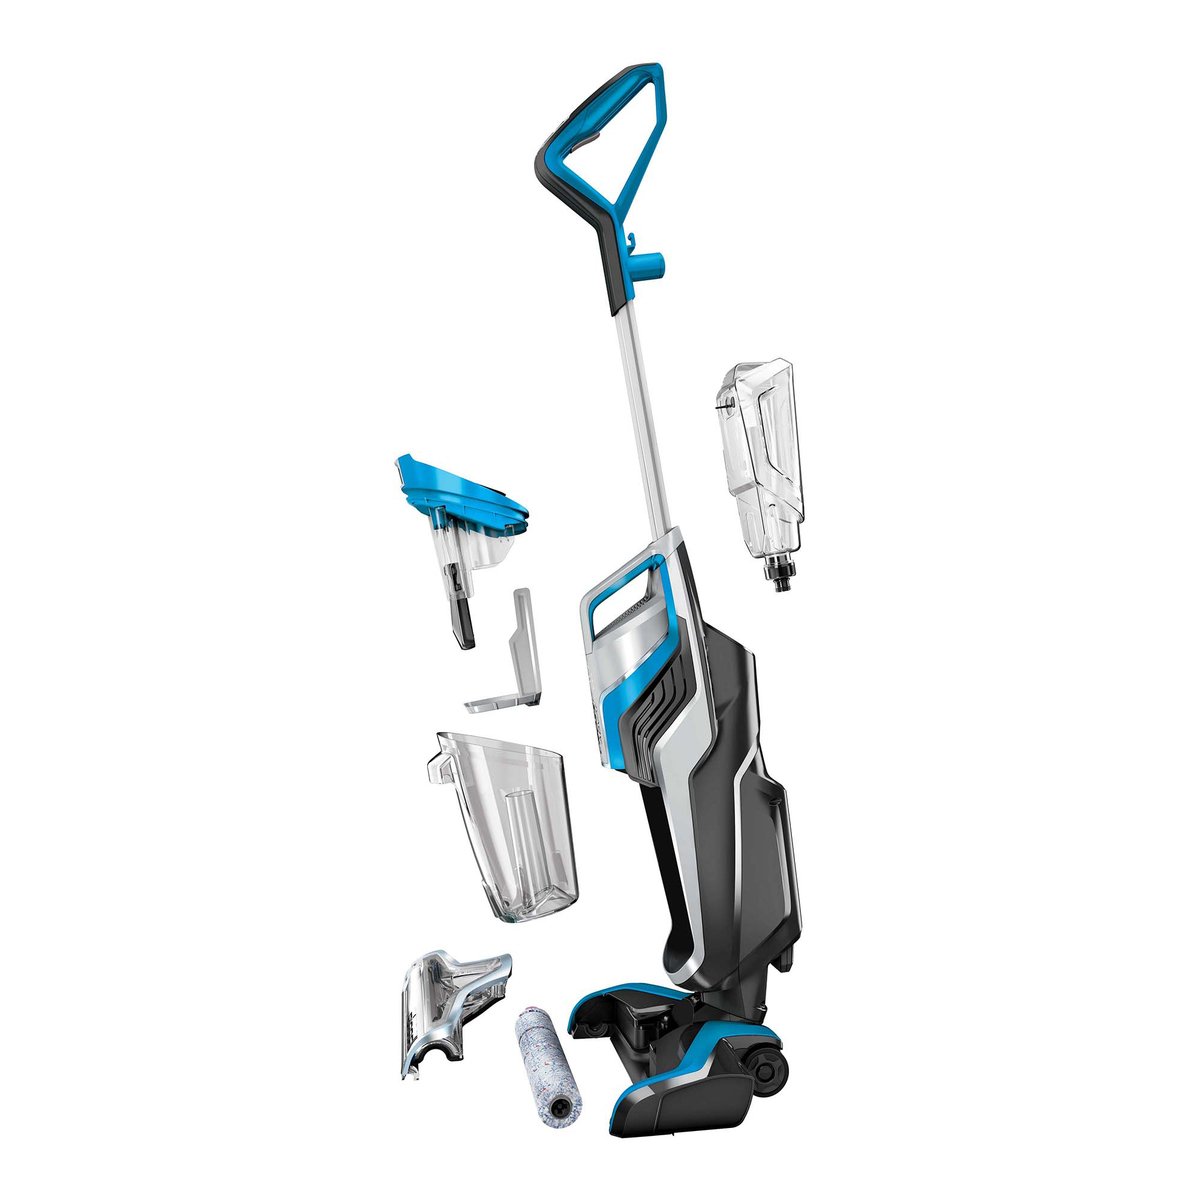 Bissell Multi-Surface Crosswave Advanced Pro Corded Wet & Dry Vacuum Cleaner 2223E 0.62LTR 560W